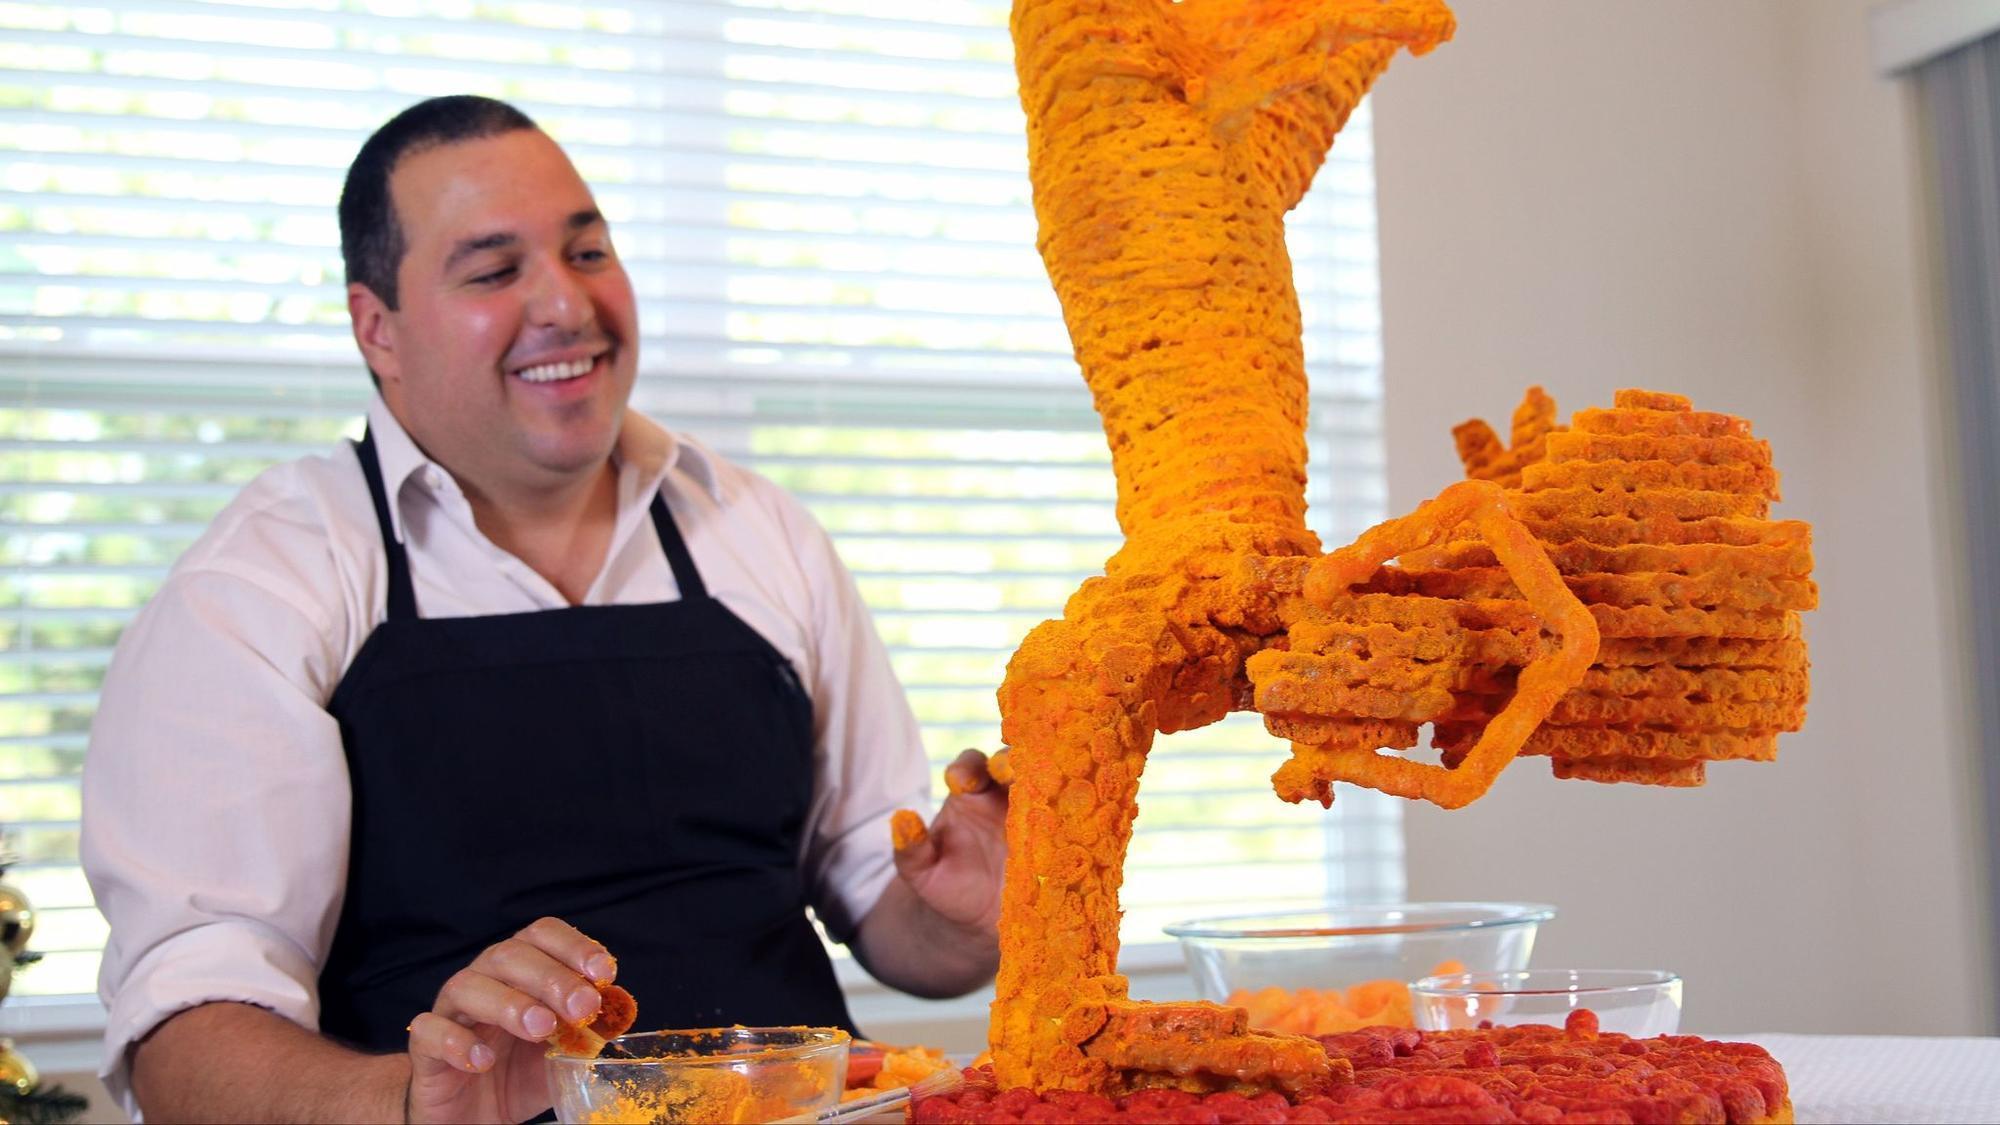 Artist uses thousands of Cheetos to make sculpture - Orlando Sentinel2000 x 1125